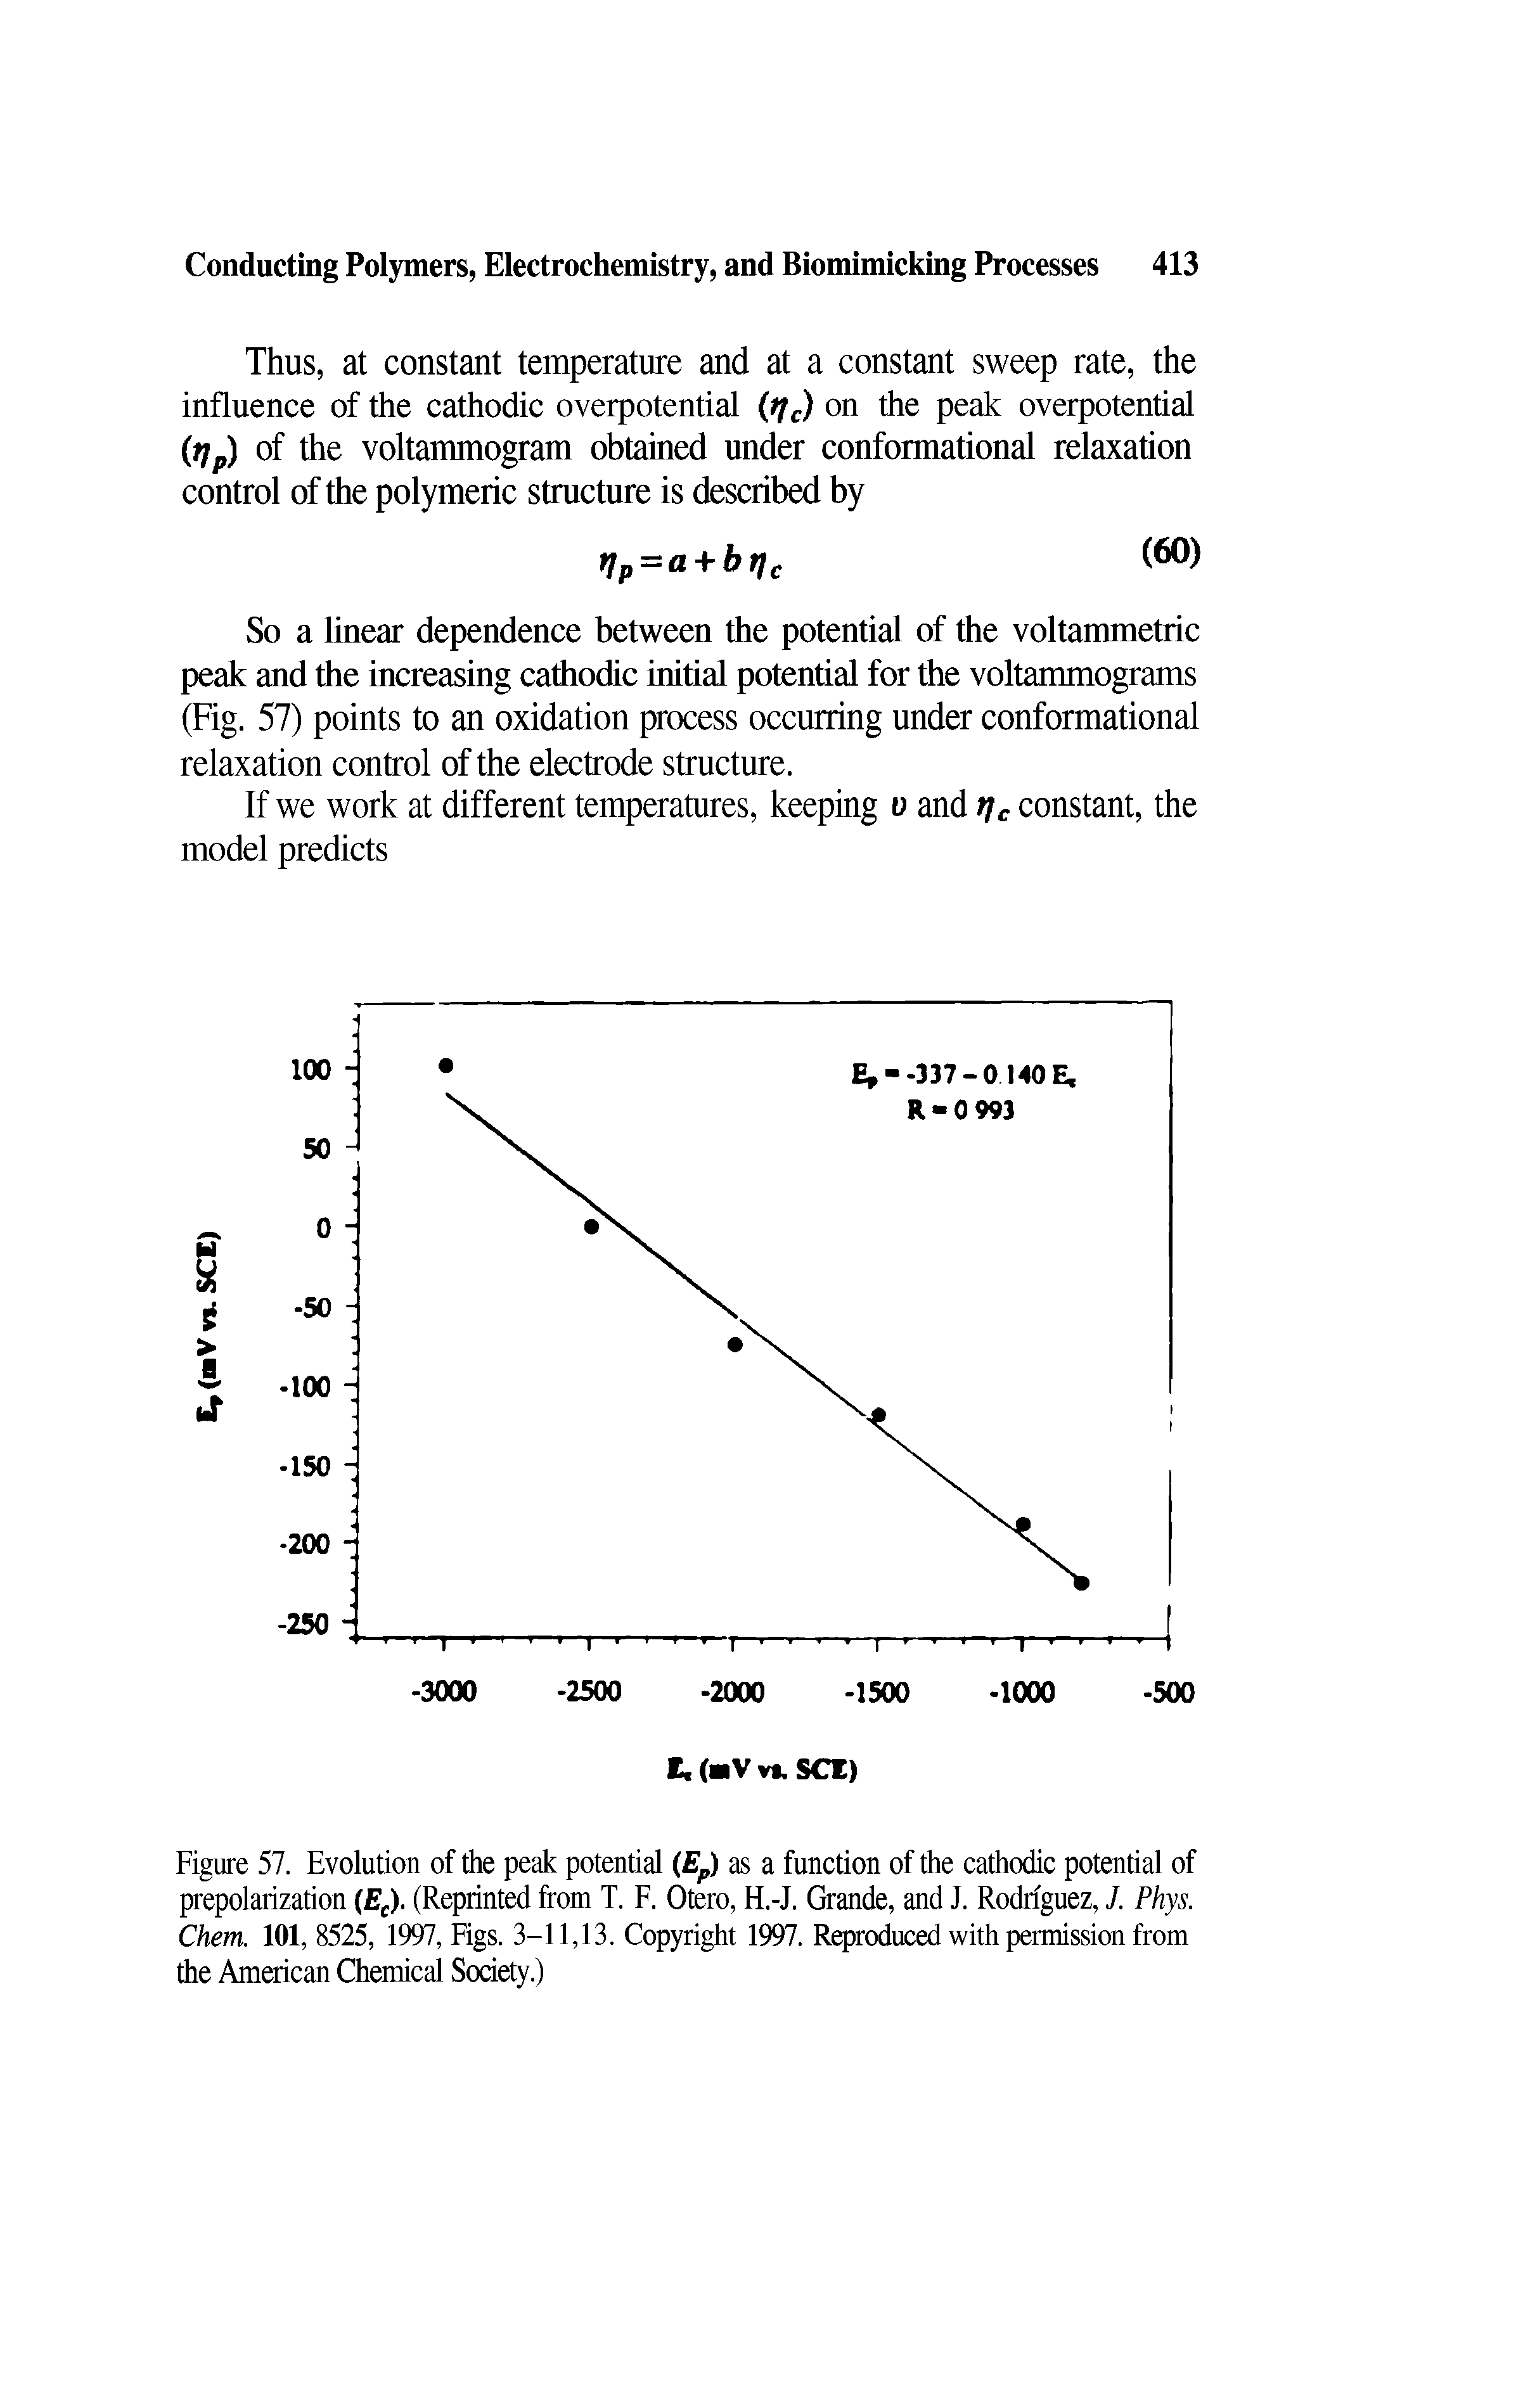 Figure 57. Evolution of the peak potential (Ep) as a function of the cathodic potential of prepolarization (Ec). (Reprinted from T. F. Otero, H.-J. Grande, and J. Rodriguez, J. Phys. Chem. 101, 8525, 1997, Figs. 3-11,13. Copyright 1997. Reproduced with permission from the American Chemical Society.)...